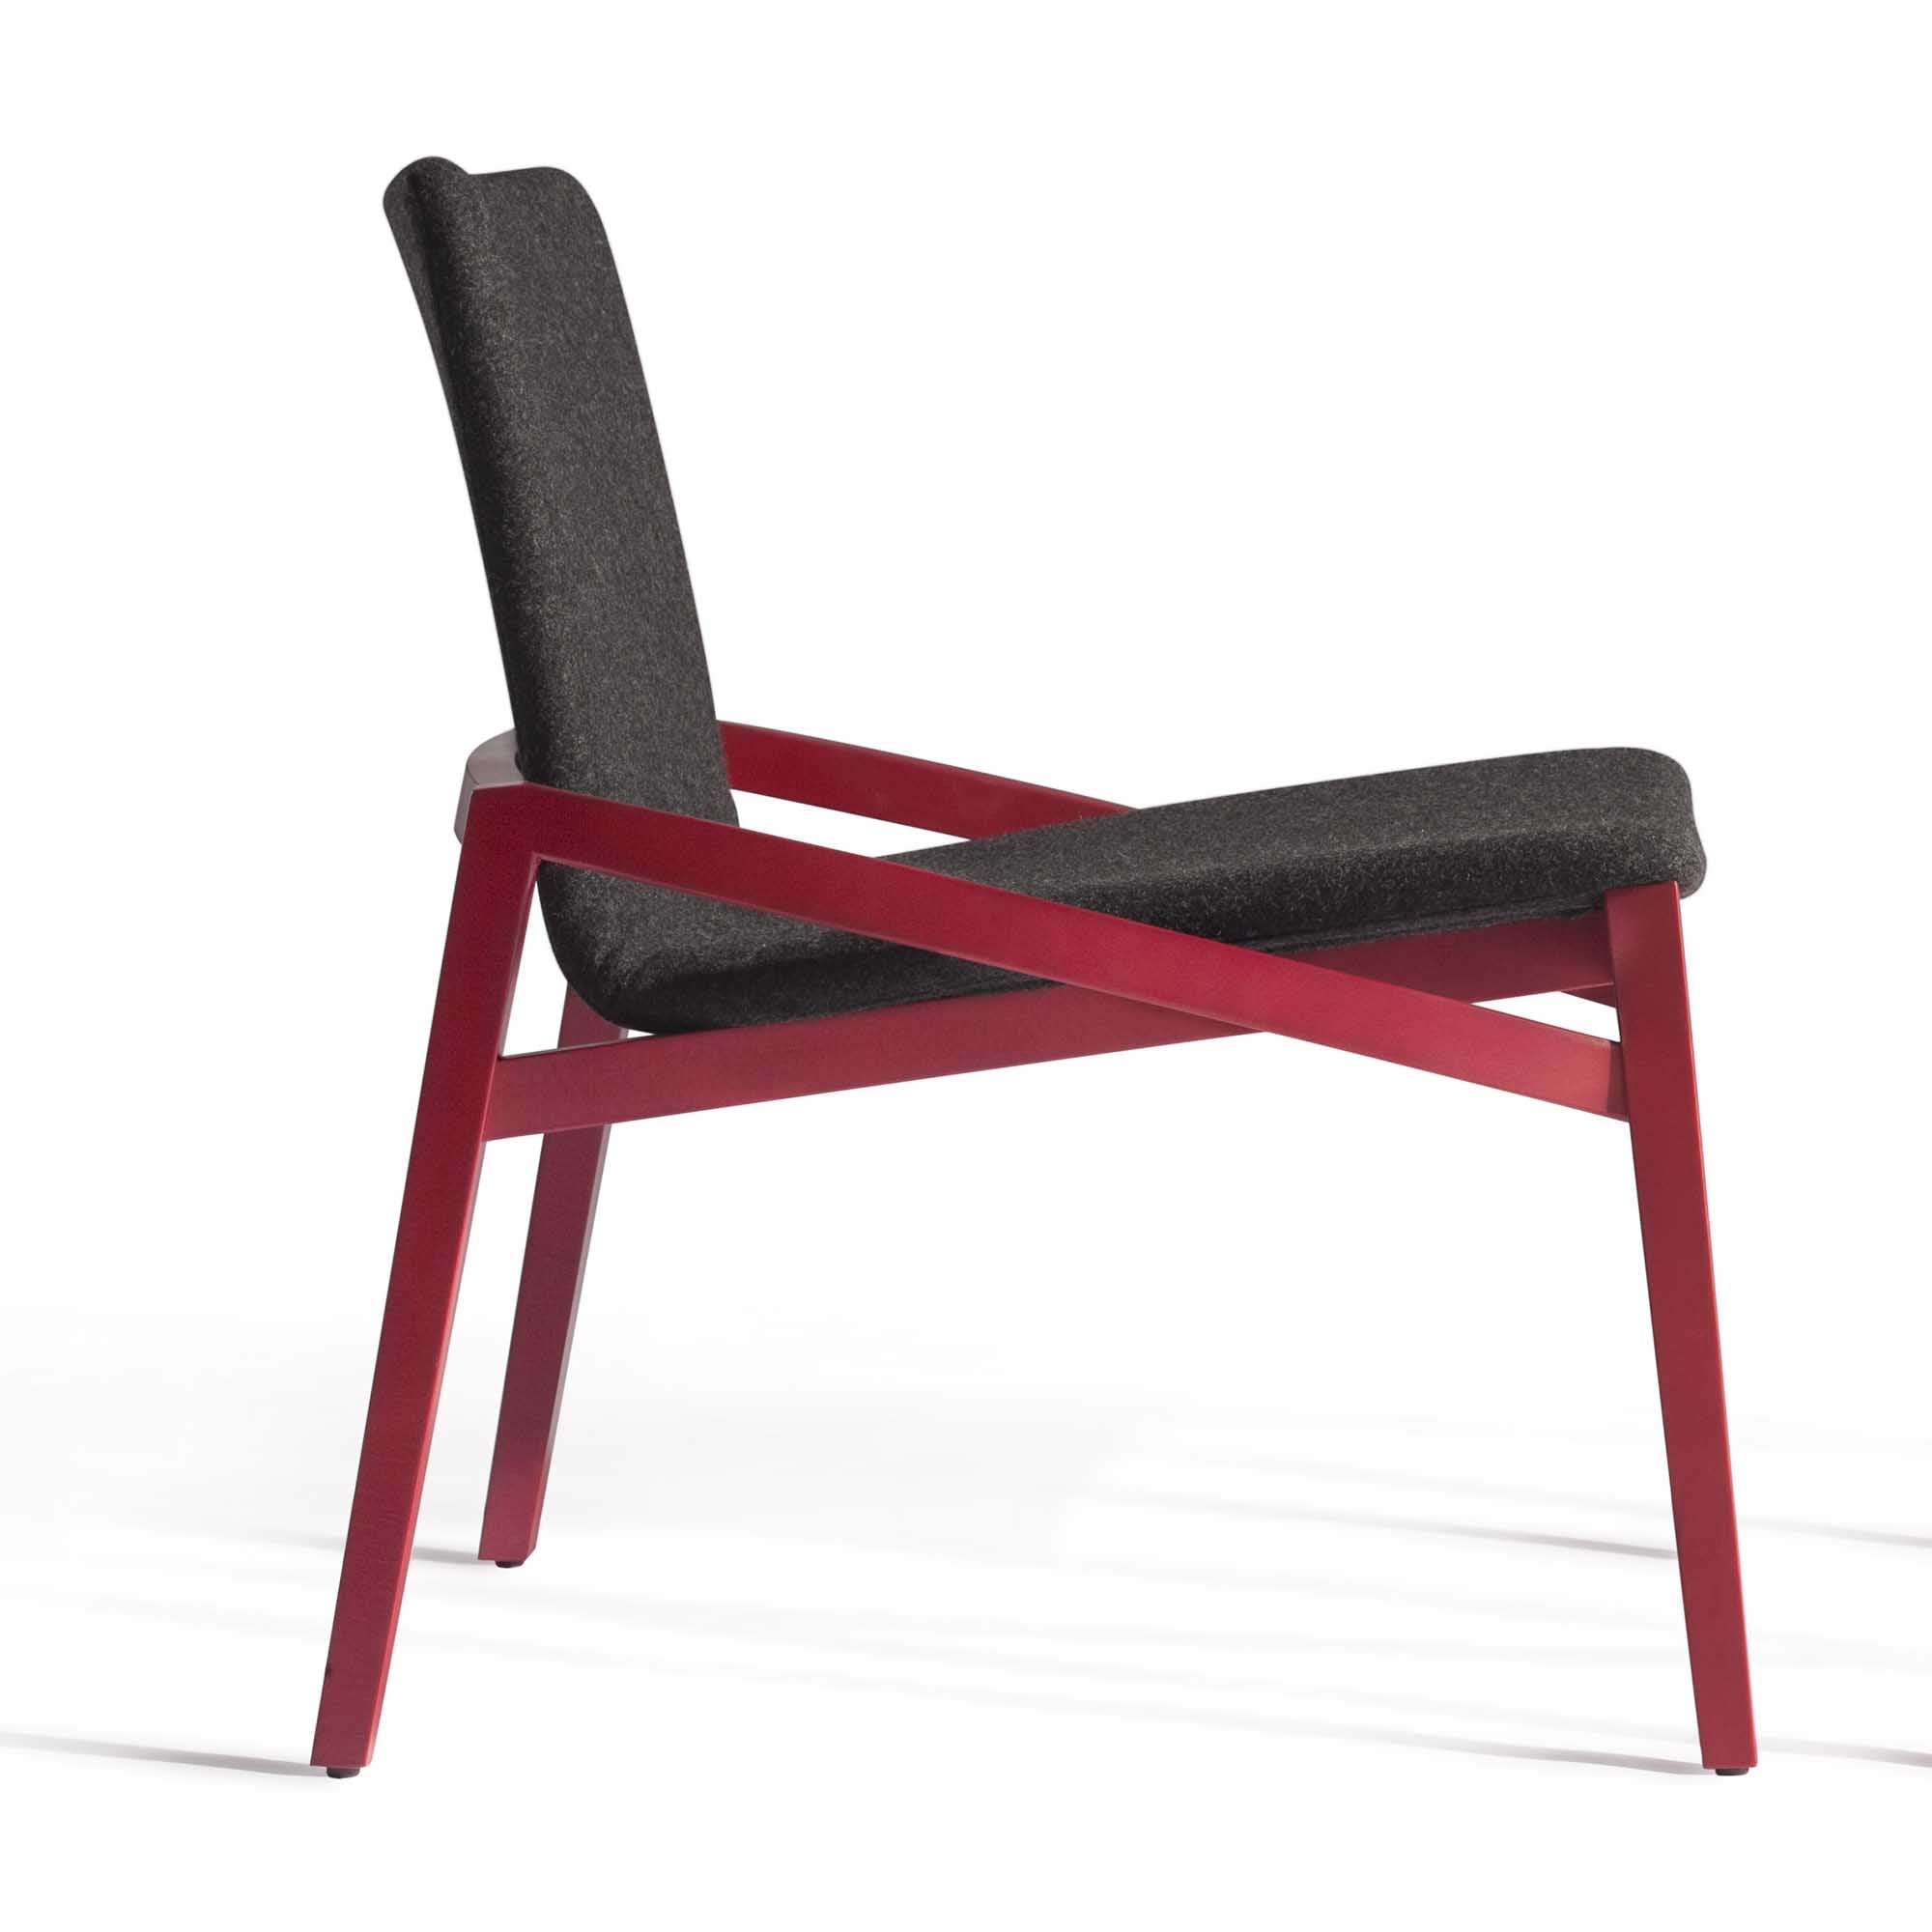 CAPITA Lounge Chair solid beech wood, red base, black fabric upholstery, side view